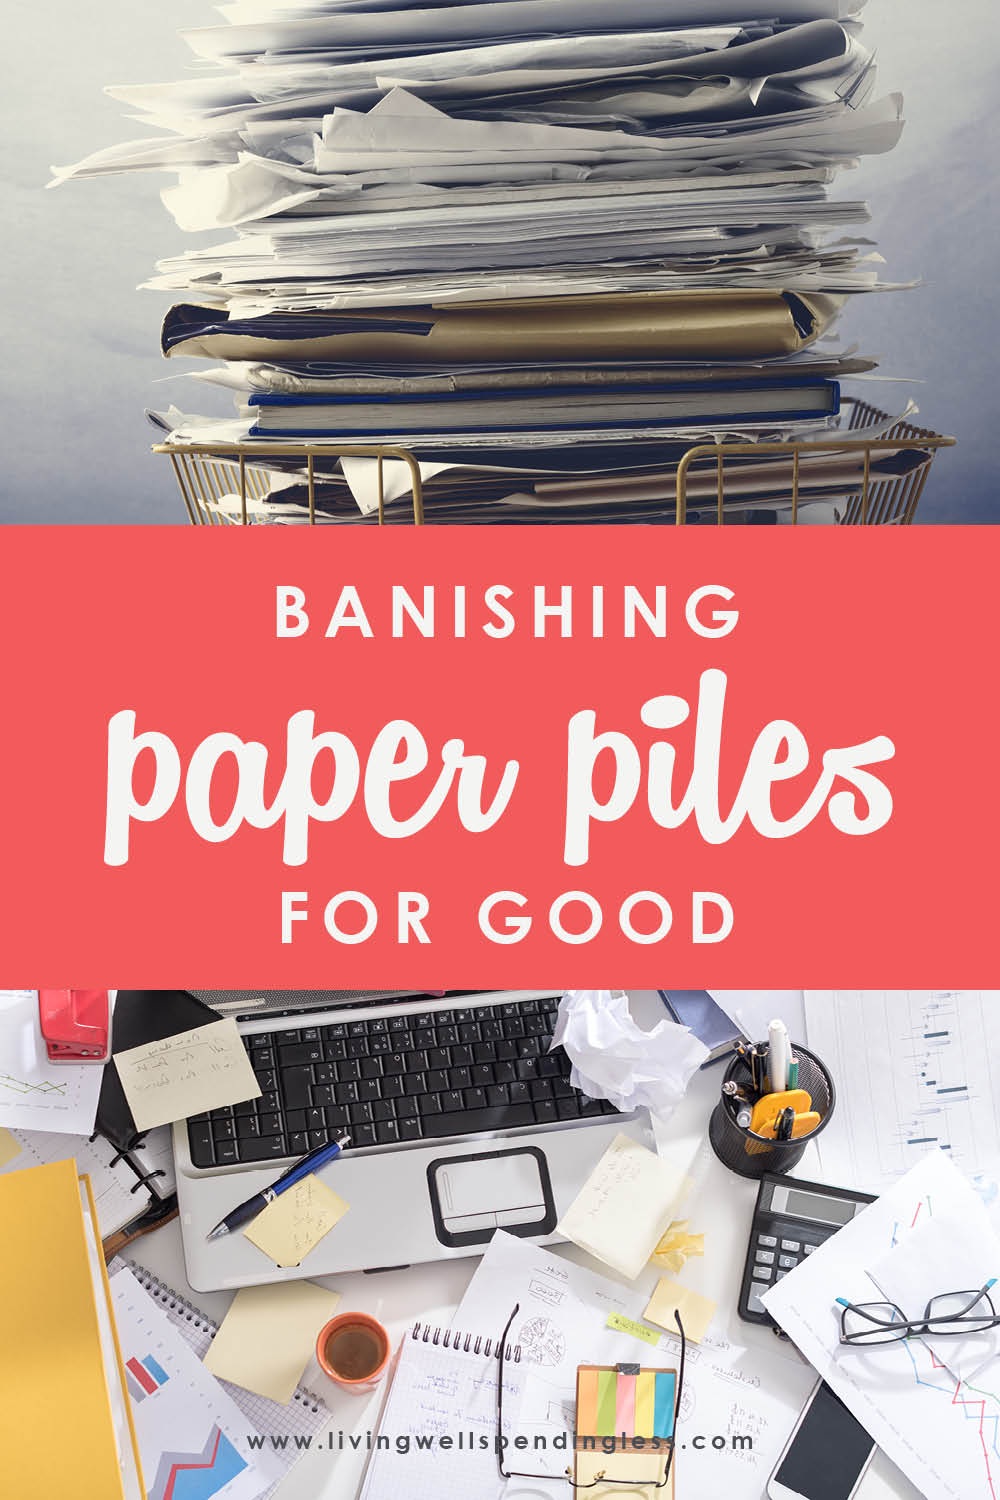 Ever feel like you are drowning in a sea of paperwork? The struggle is real! Use these 8 simple ways to eliminate paper clutter once and for all! #decluttering #tidyingup #paperclutter #cleaning #hometips